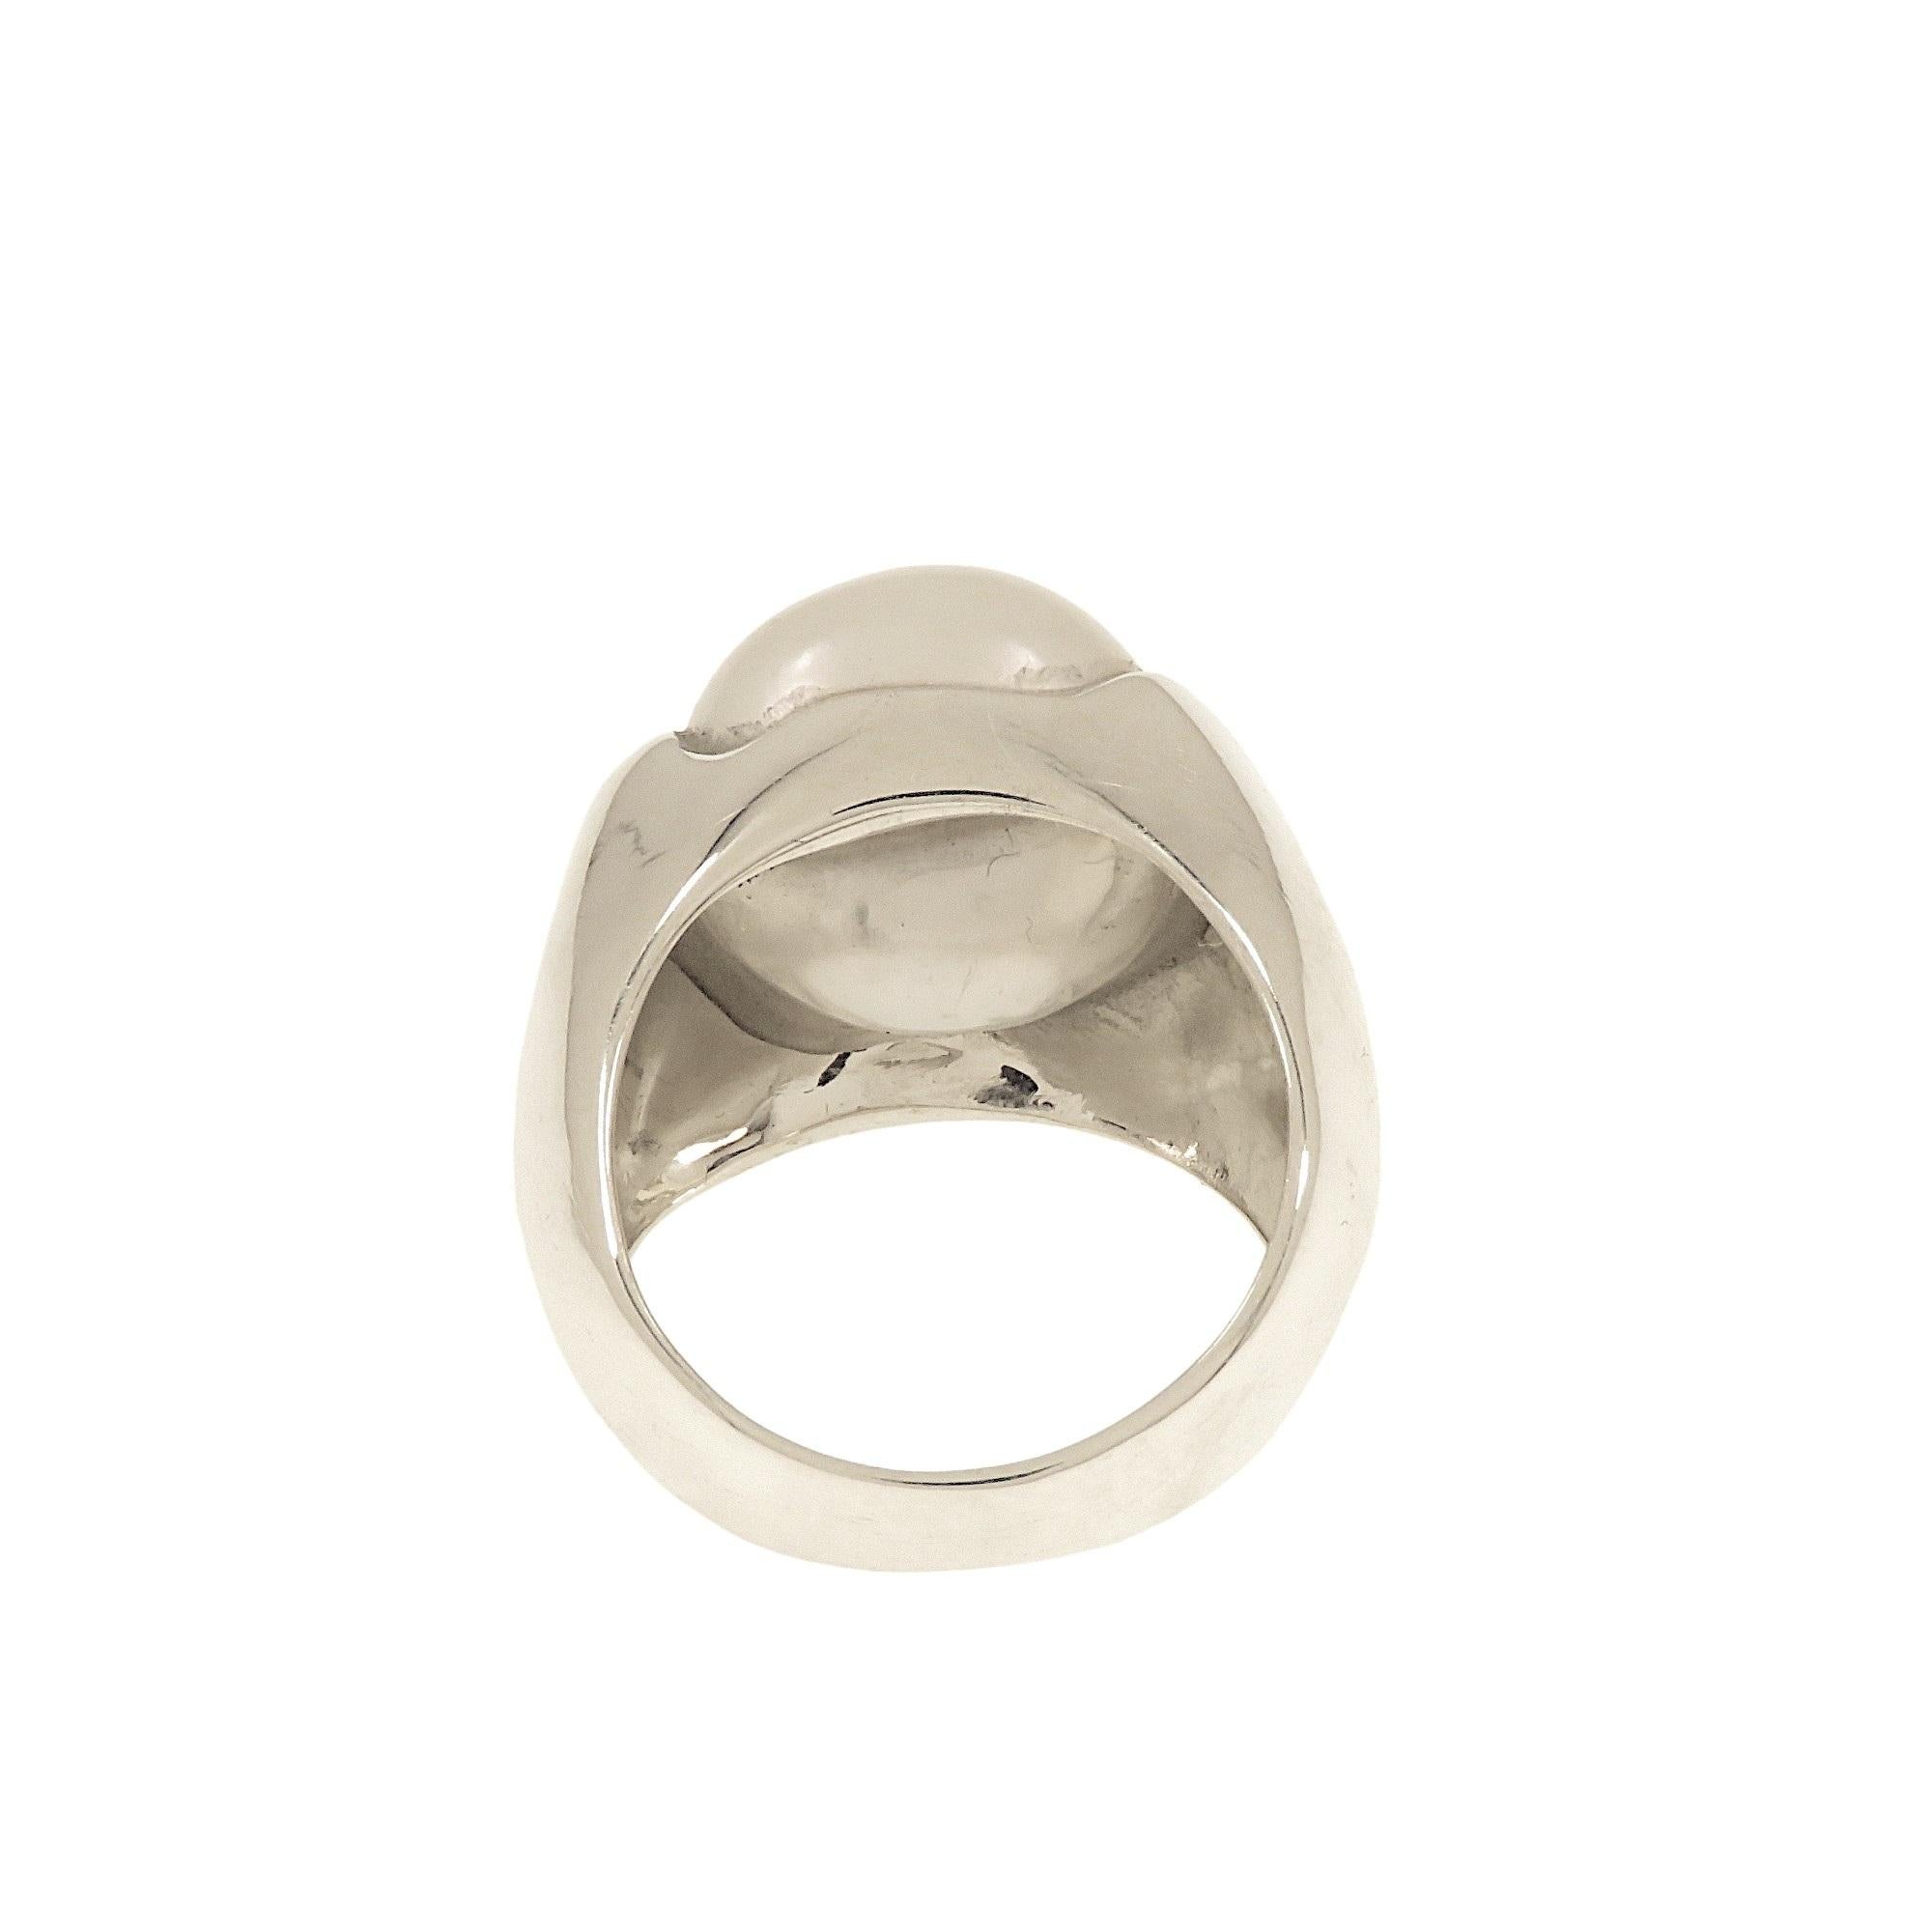 Botta jewelry ring with Australian pearl in white gold For Sale 2